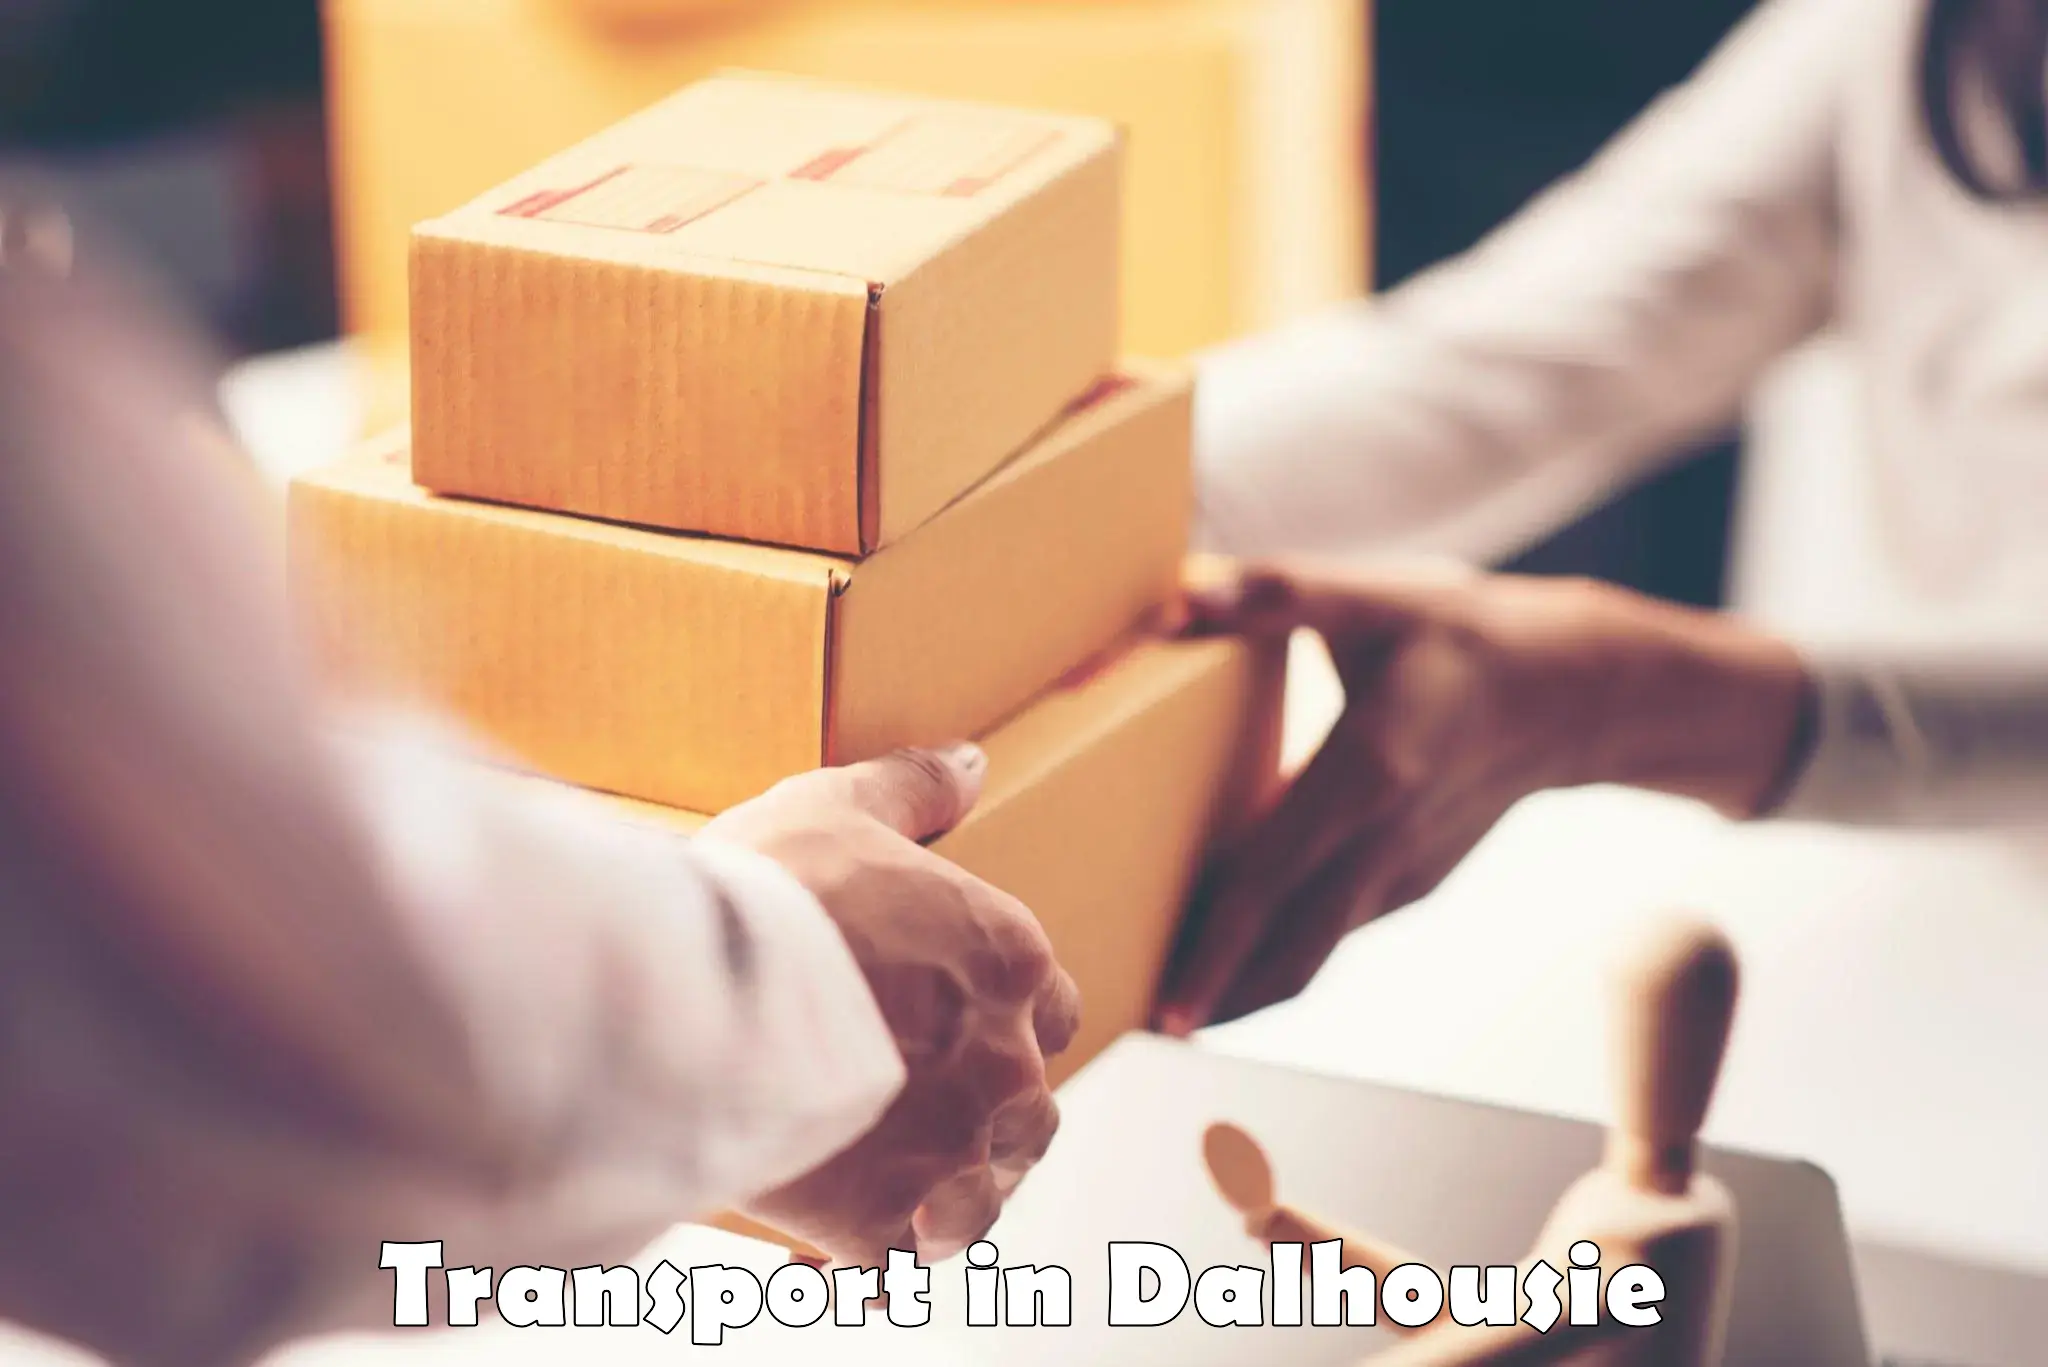 Commercial transport service in Dalhousie